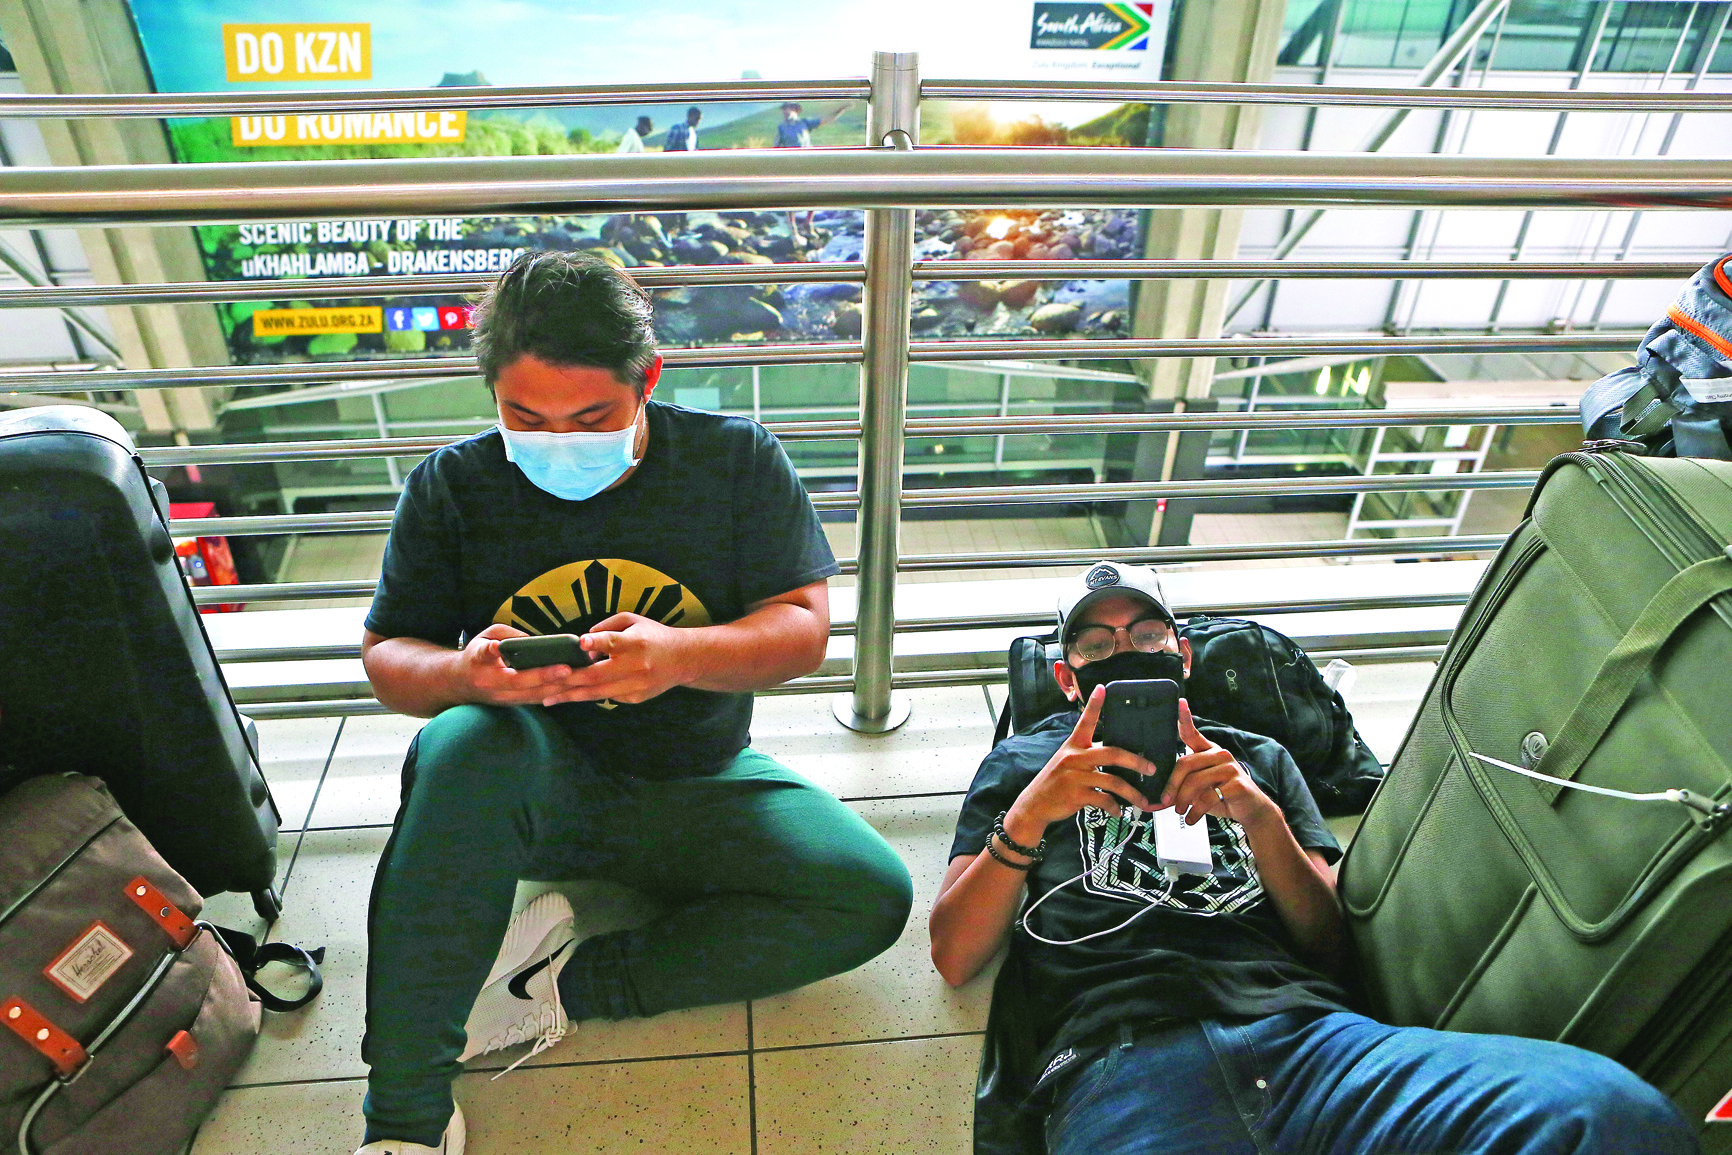 Travellers wearing masks use their mobile phones at OR Tambo International Airport, Johannesburg, on February 28, 2020 amid fear of Covid-19 epidemic. (Photo by Phill Magakoe / AFP)